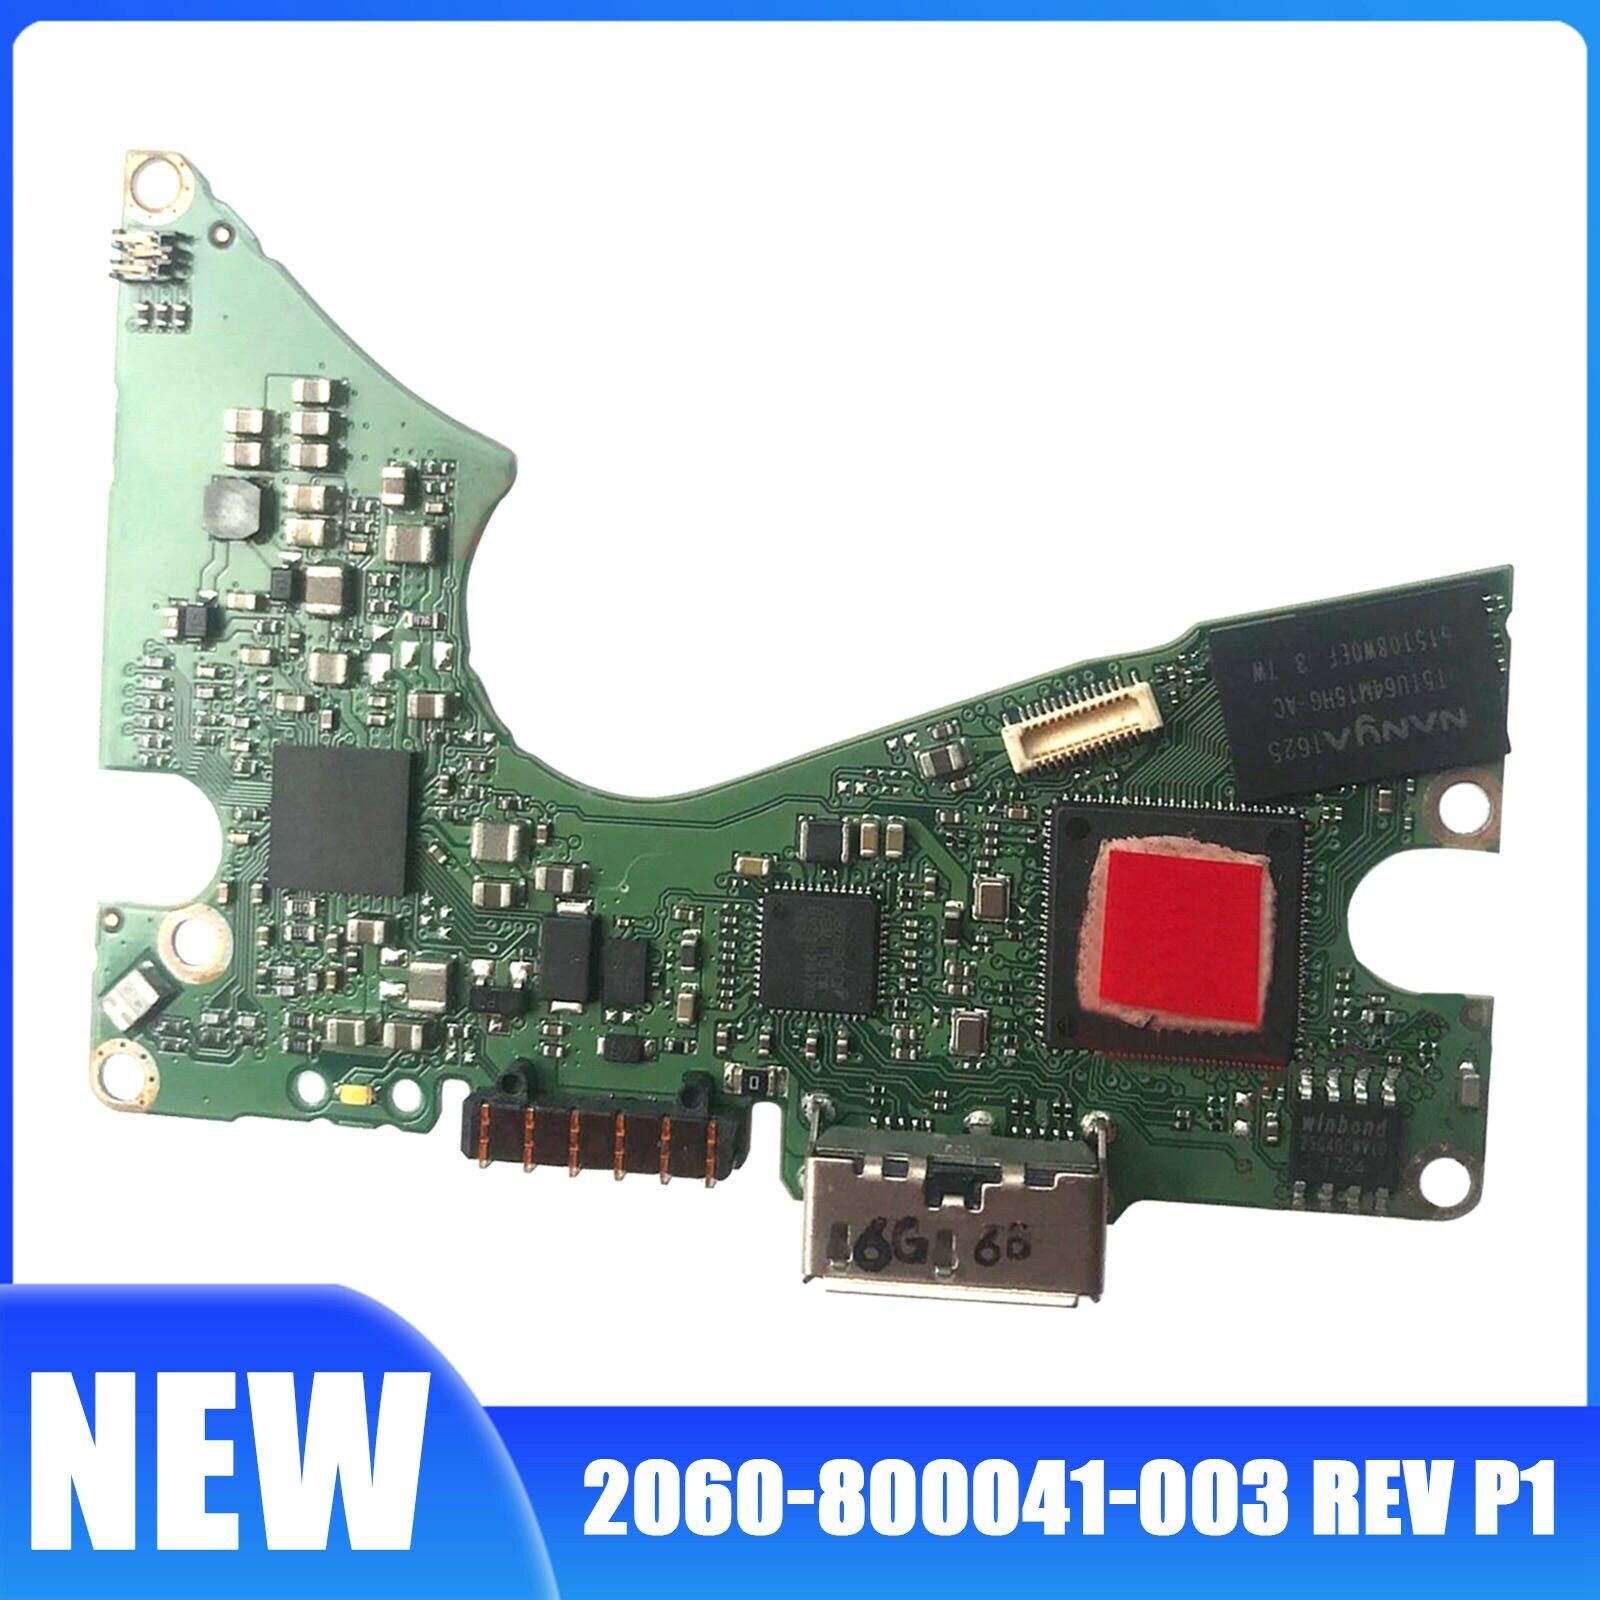 1pc HDD PCB Logic Board Number: 2060-800041-003 rev p1 2024 NEW FAST SHIP